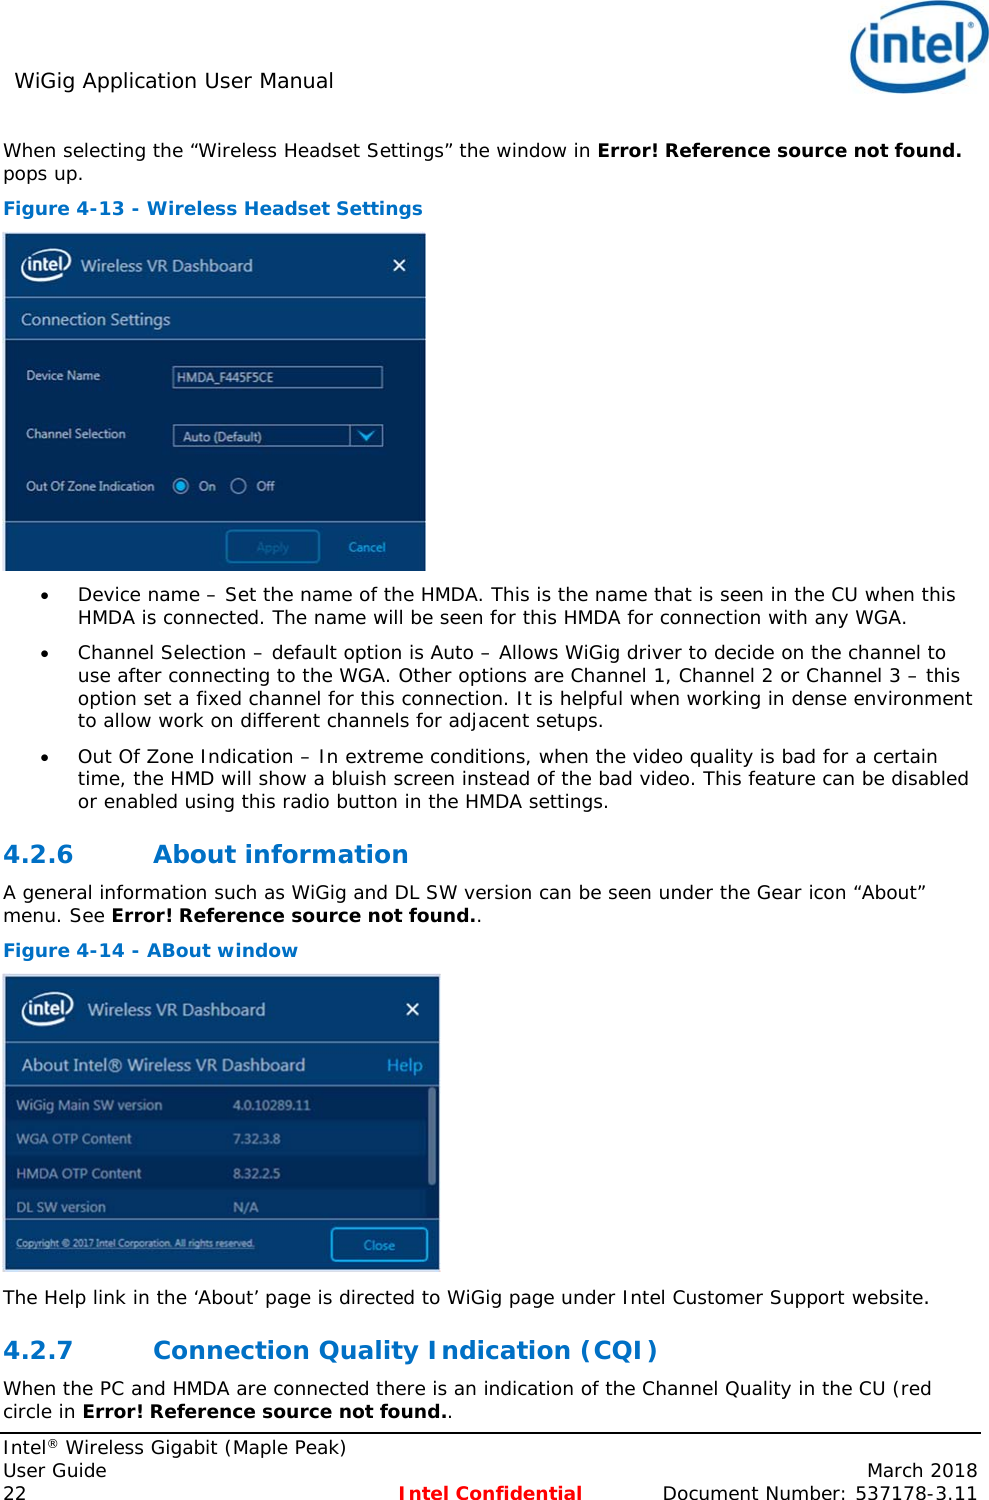 WiGig Application User Manual     Intel® Wireless Gigabit (Maple Peak) User Guide    March 2018 22 Intel Confidential  Document Number: 537178-3.11 When selecting the “Wireless Headset Settings” the window in Error! Reference source not found. pops up. Figure 4-13 - Wireless Headset Settings   Device name – Set the name of the HMDA. This is the name that is seen in the CU when this HMDA is connected. The name will be seen for this HMDA for connection with any WGA.  Channel Selection – default option is Auto – Allows WiGig driver to decide on the channel to use after connecting to the WGA. Other options are Channel 1, Channel 2 or Channel 3 – this option set a fixed channel for this connection. It is helpful when working in dense environment to allow work on different channels for adjacent setups.   Out Of Zone Indication – In extreme conditions, when the video quality is bad for a certain time, the HMD will show a bluish screen instead of the bad video. This feature can be disabled or enabled using this radio button in the HMDA settings. 4.2.6 About information A general information such as WiGig and DL SW version can be seen under the Gear icon “About” menu. See Error! Reference source not found.. Figure 4-14 - ABout window  The Help link in the ‘About’ page is directed to WiGig page under Intel Customer Support website. 4.2.7 Connection Quality Indication (CQI) When the PC and HMDA are connected there is an indication of the Channel Quality in the CU (red circle in Error! Reference source not found..  